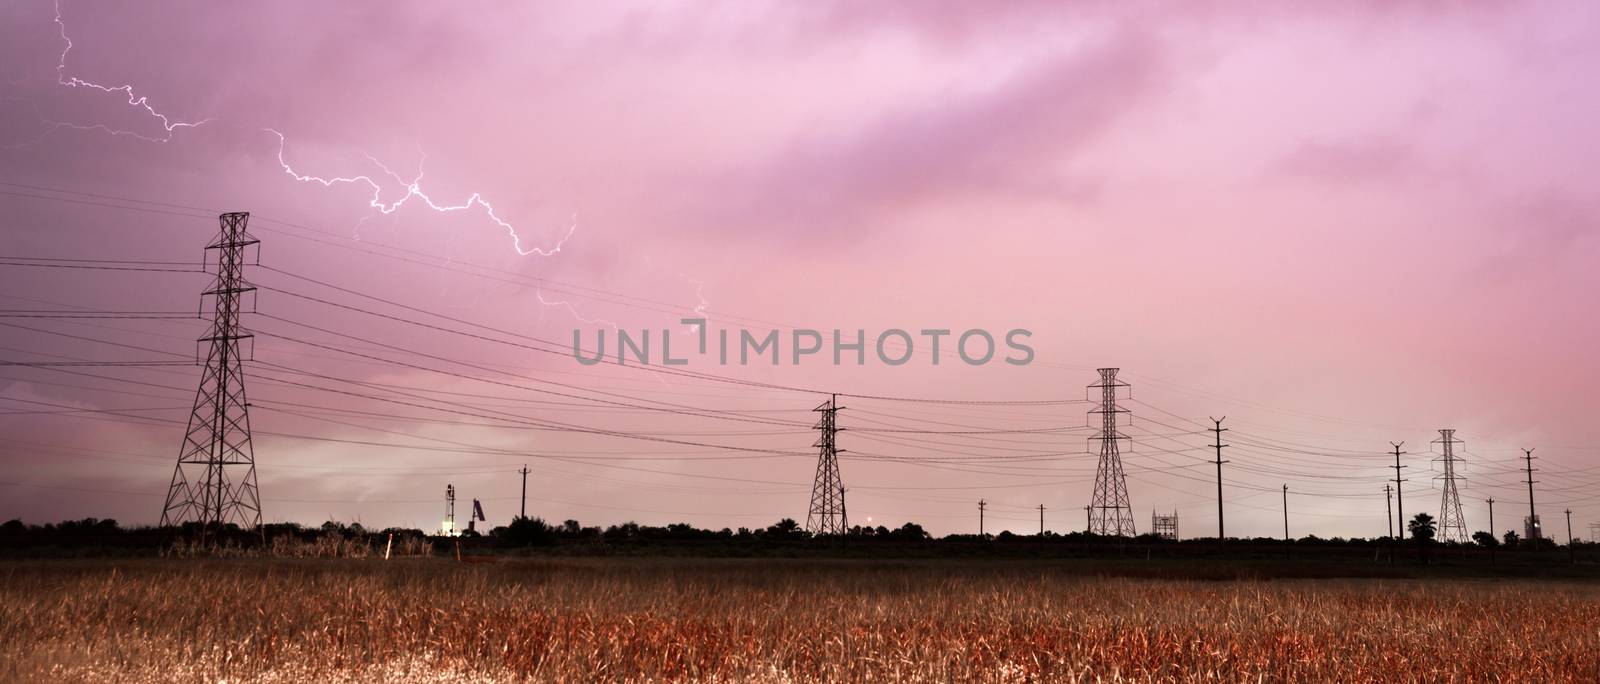 Deep South Thunderstorm Lightning Strike over Power Lines Poles by ChrisBoswell